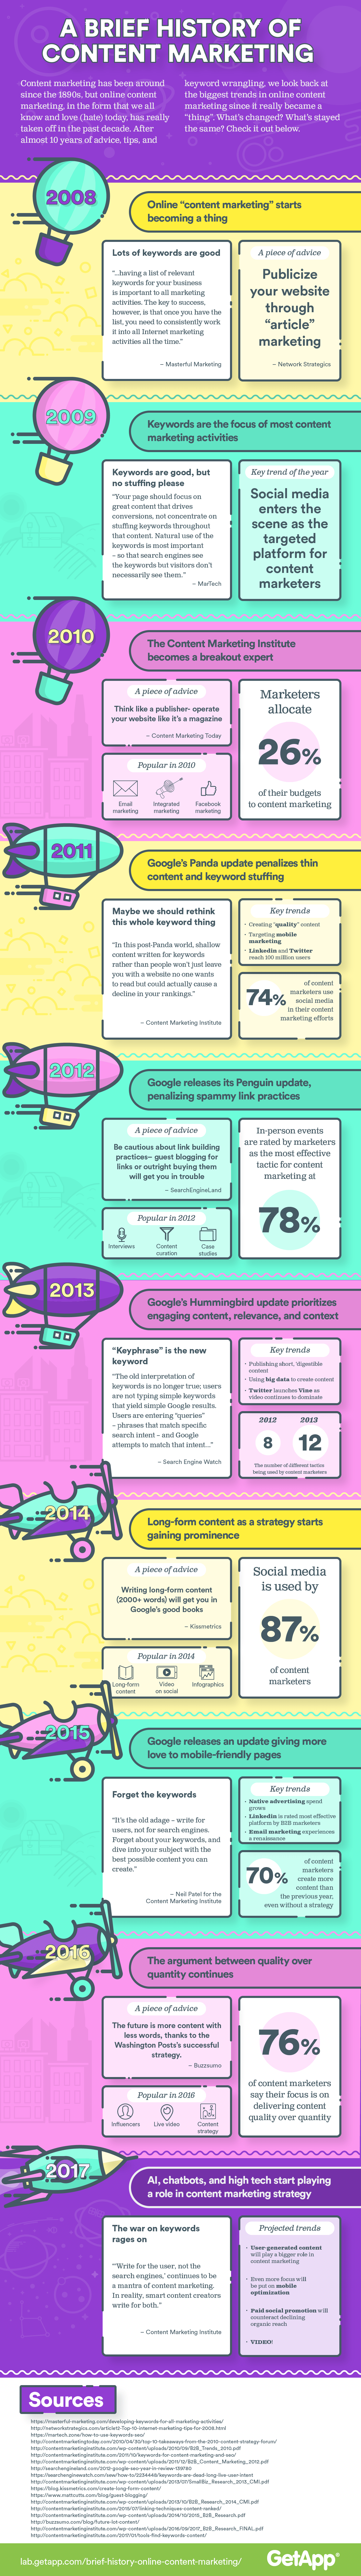 A Brief History of Content Marketing - #Infographic